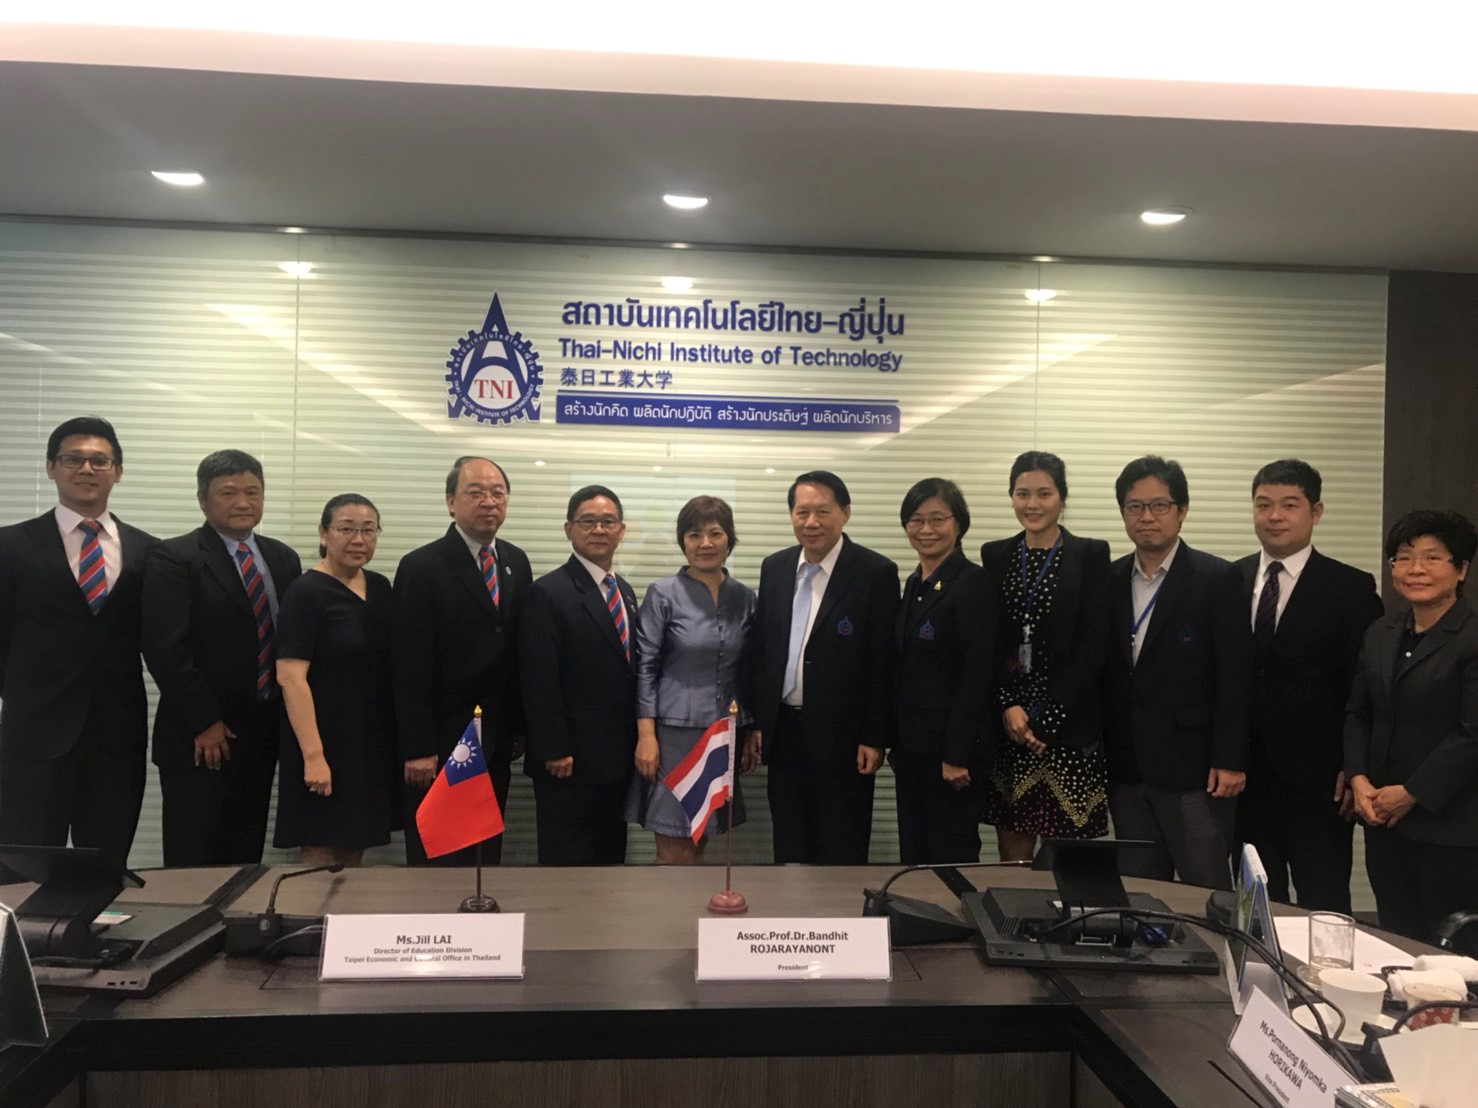 TECO in Thailand & the Federation of Overseas Chinese Traders Alumni of Thailand Visit Thai-Nichi Institute of Technology, Renowned for Work-integrated Learning